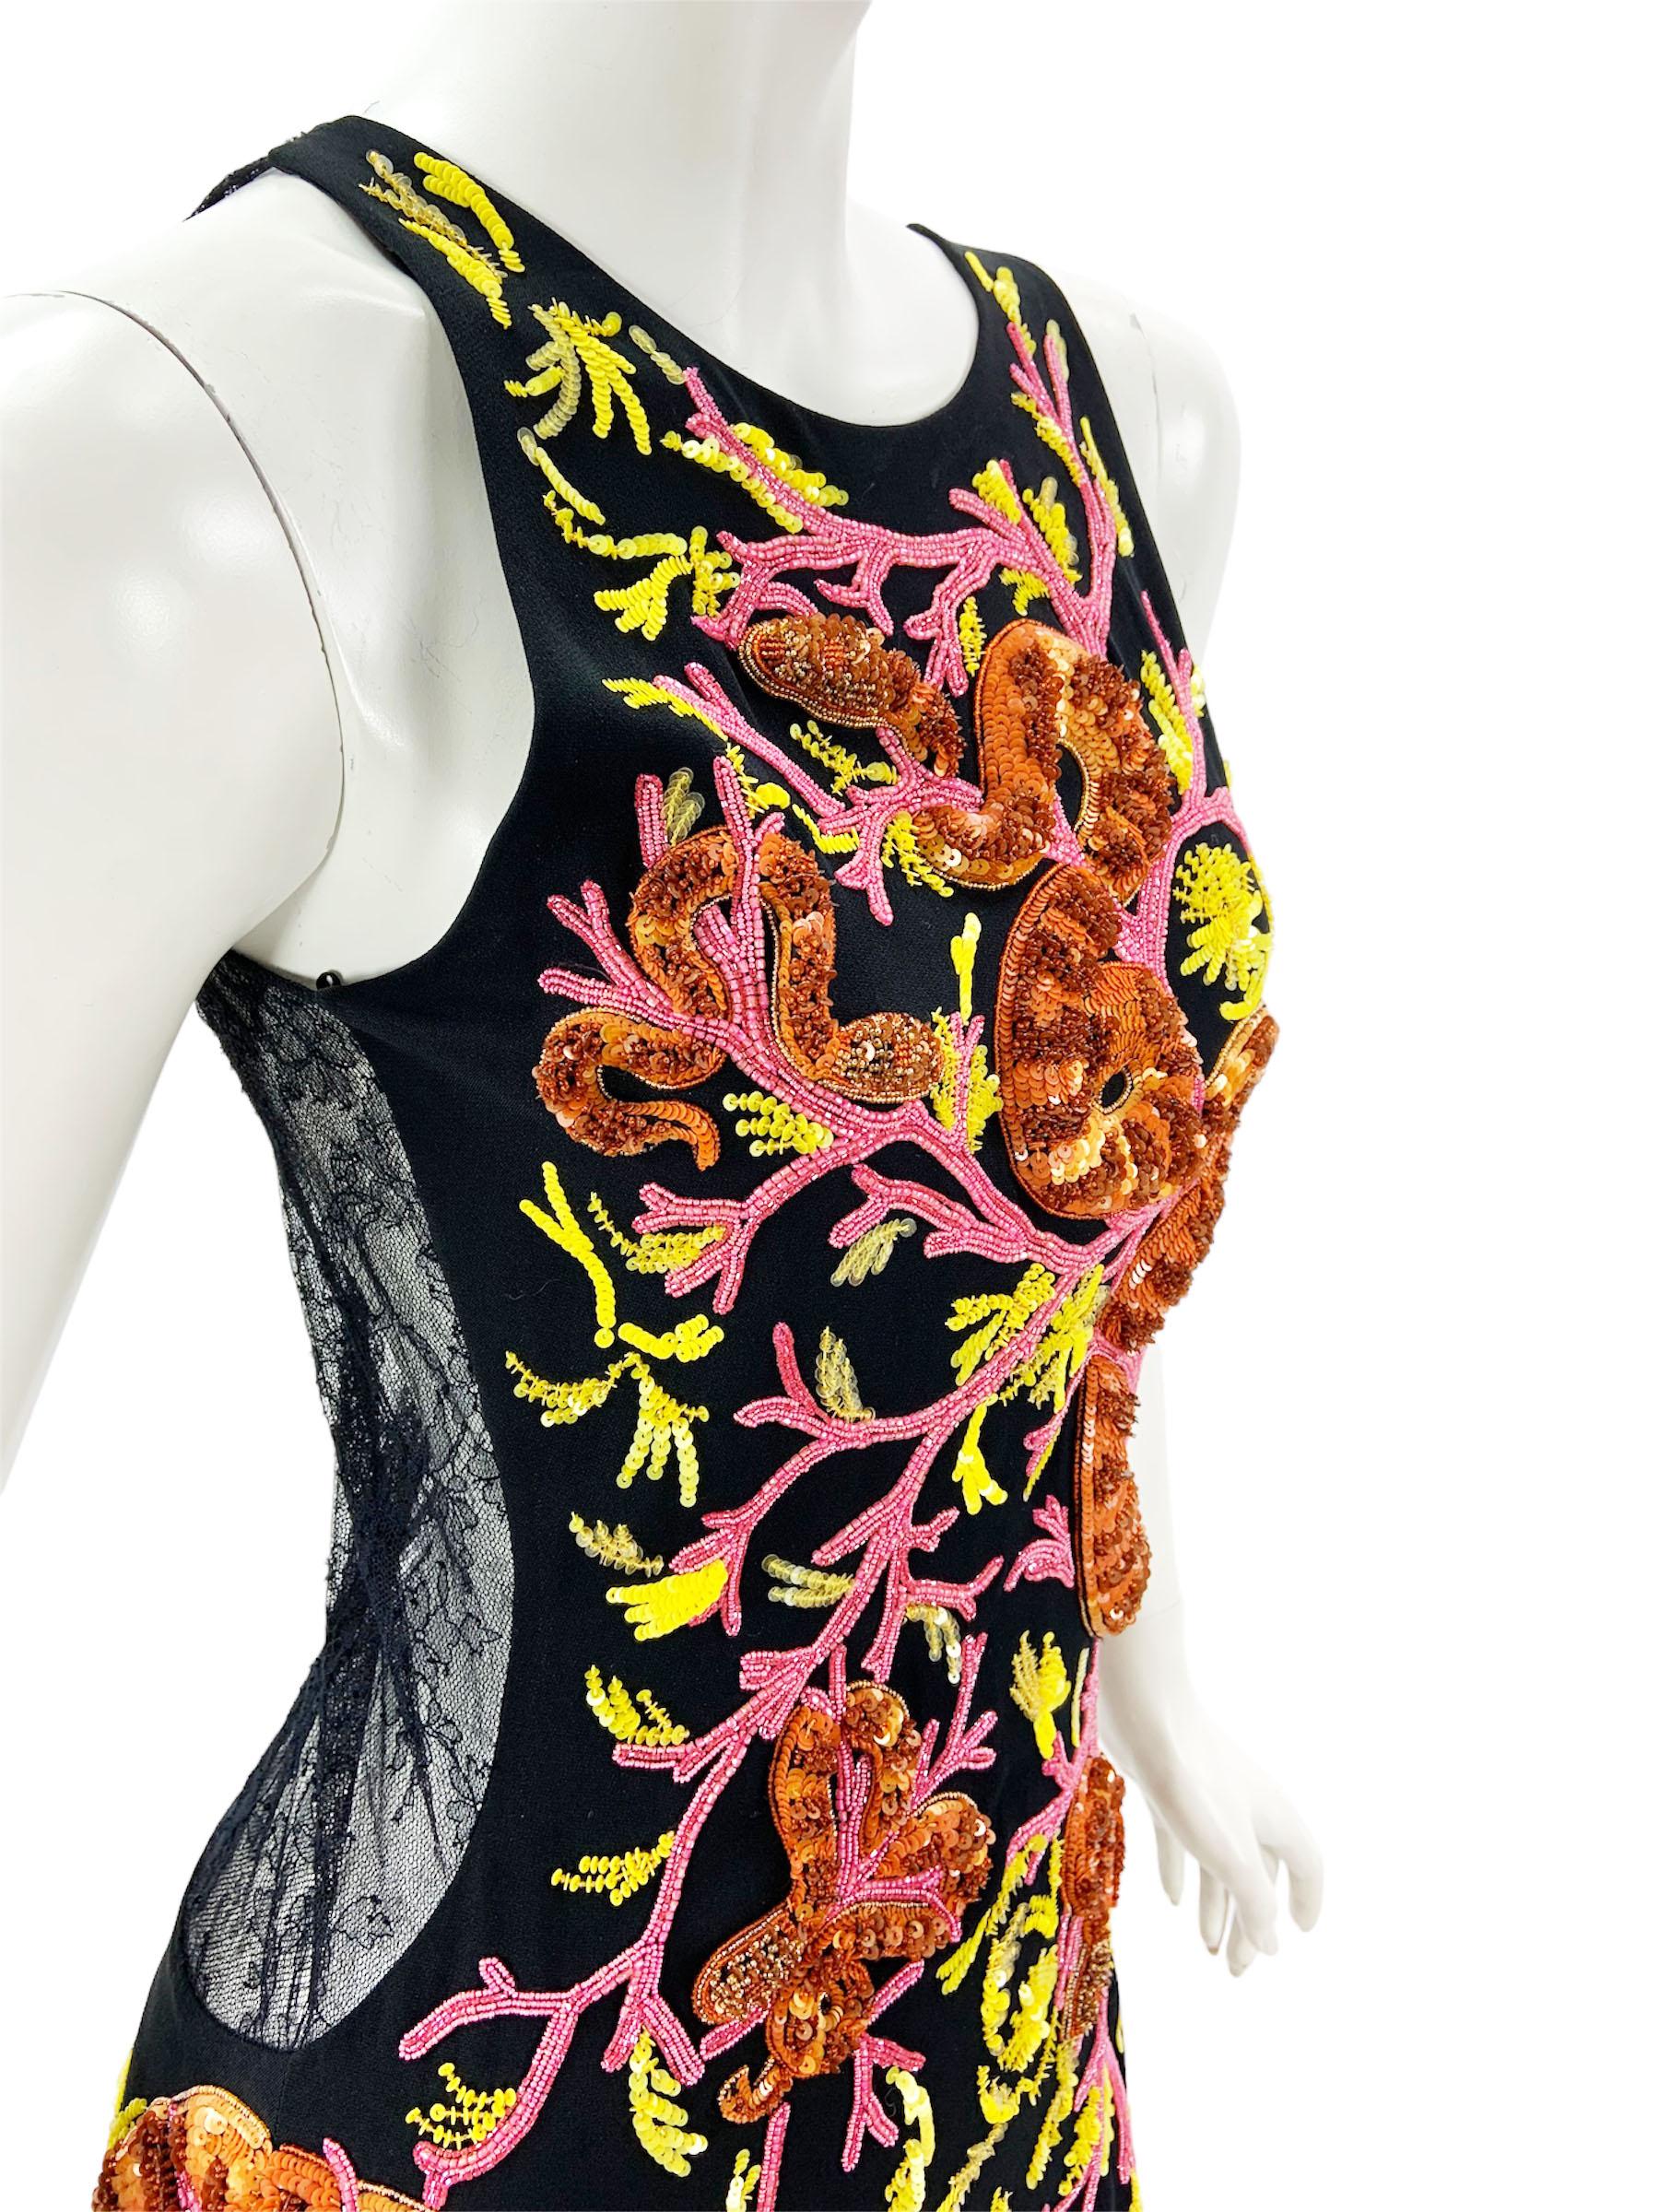 New Roberto Cavalli 3-D Snake Corals Embellished Lace Mini Dress Italian 38, 40 For Sale 1